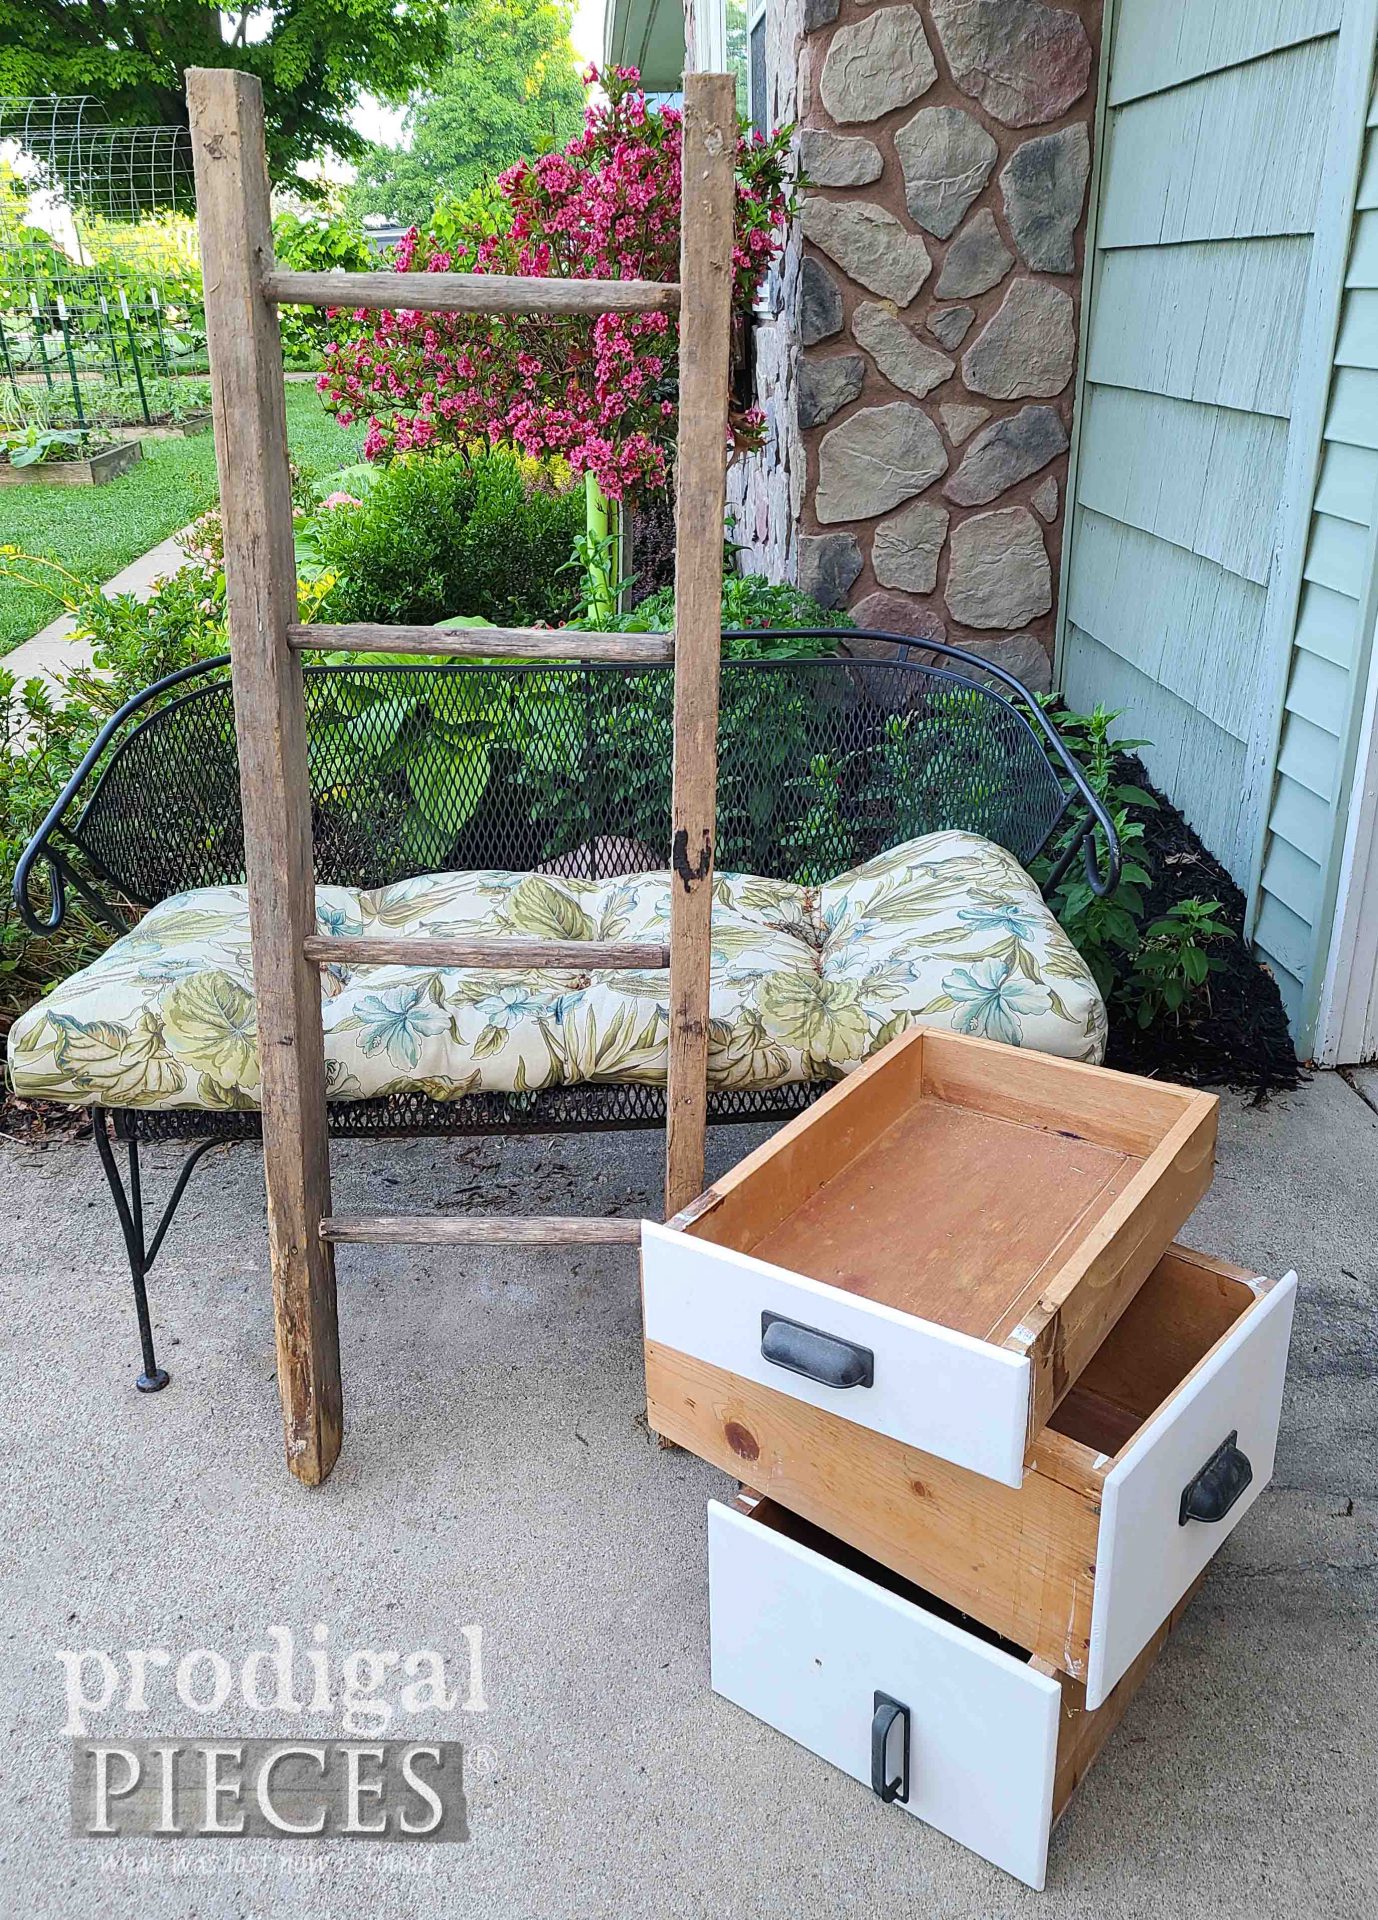 Curbside Drawers and Ladder Before Upcycle by Larissa of Prodigal Pieces | prodigalpieces.com